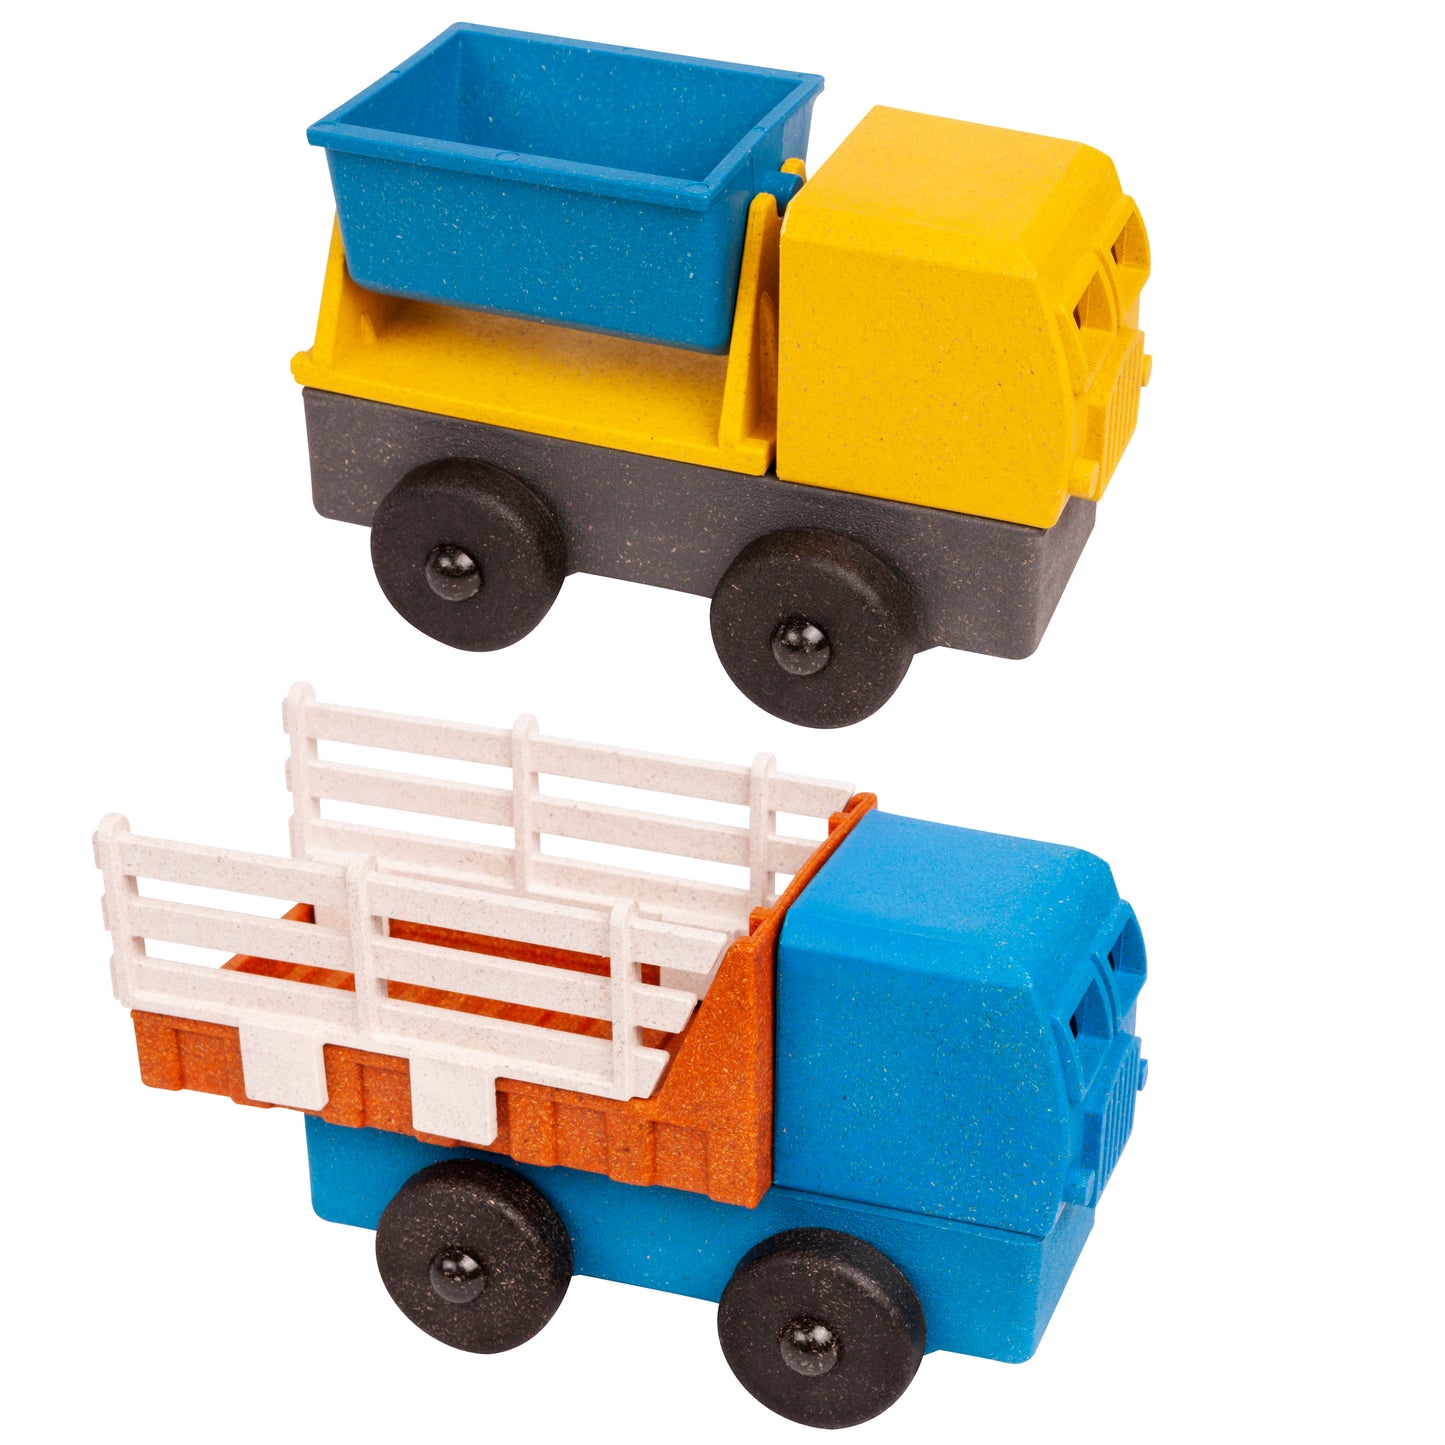 Tipper Truck Toy and Stake Truck Toy from Luke's Toy Factory